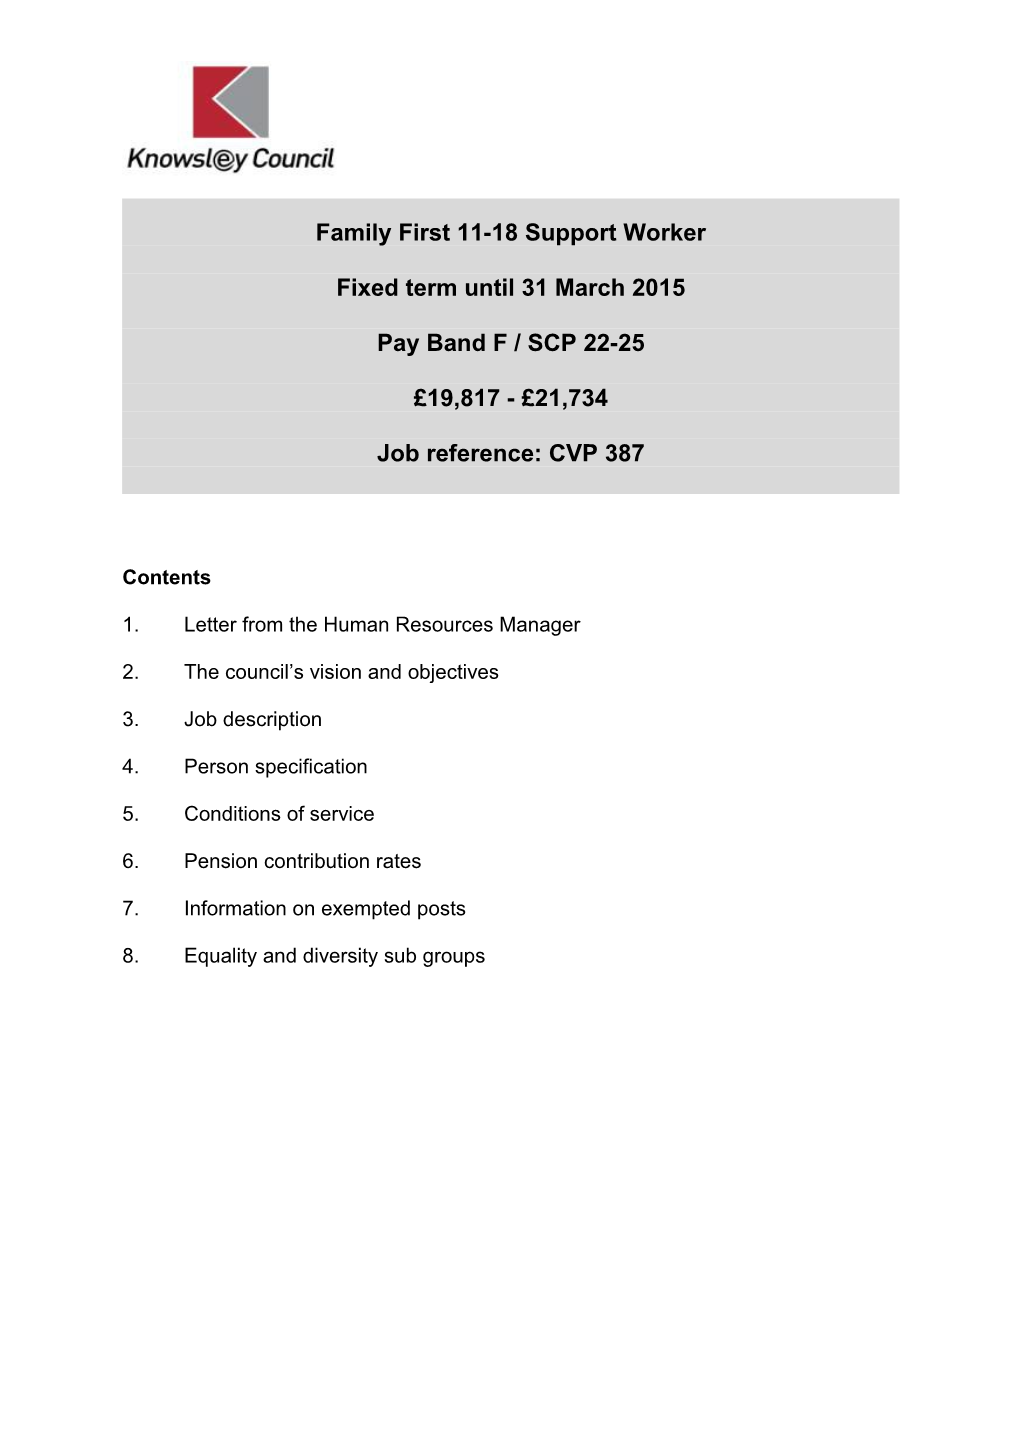 Family First 11-18 Support Worker